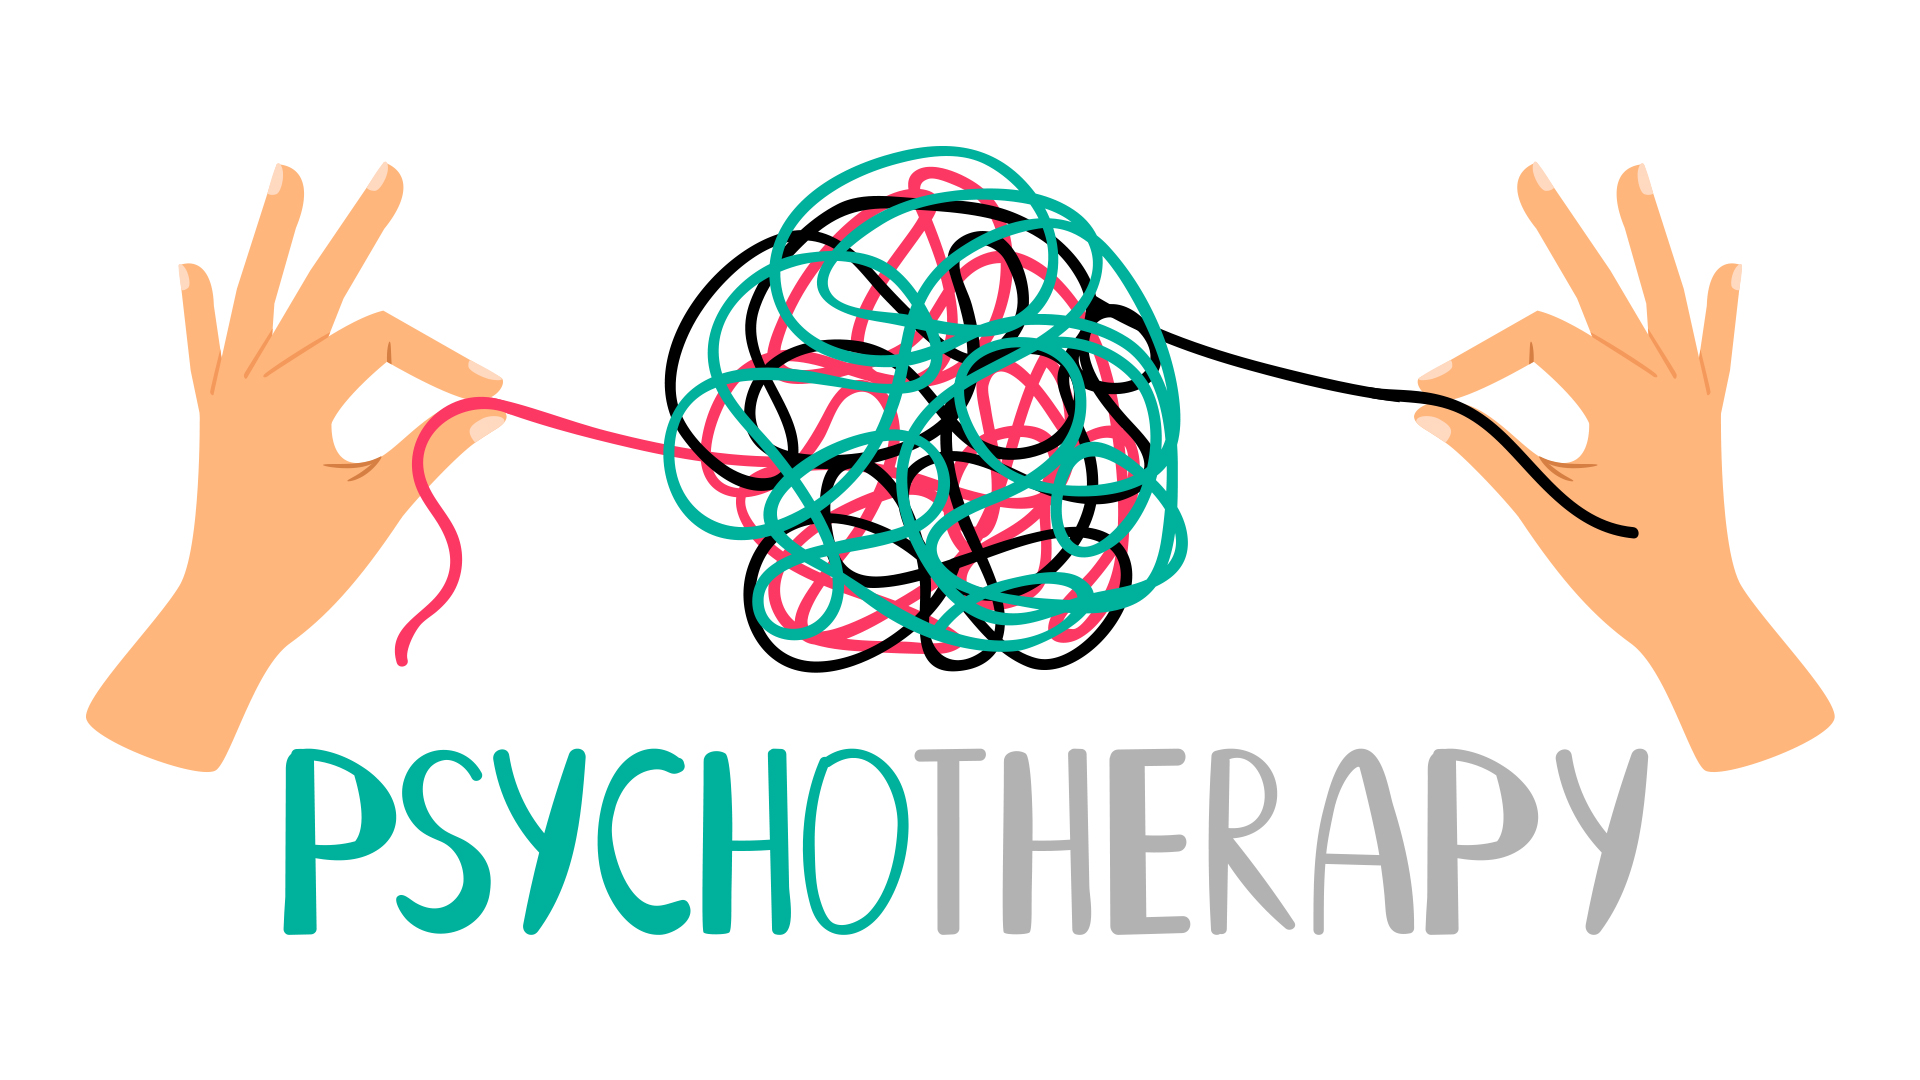 Psycho therapy tangled image